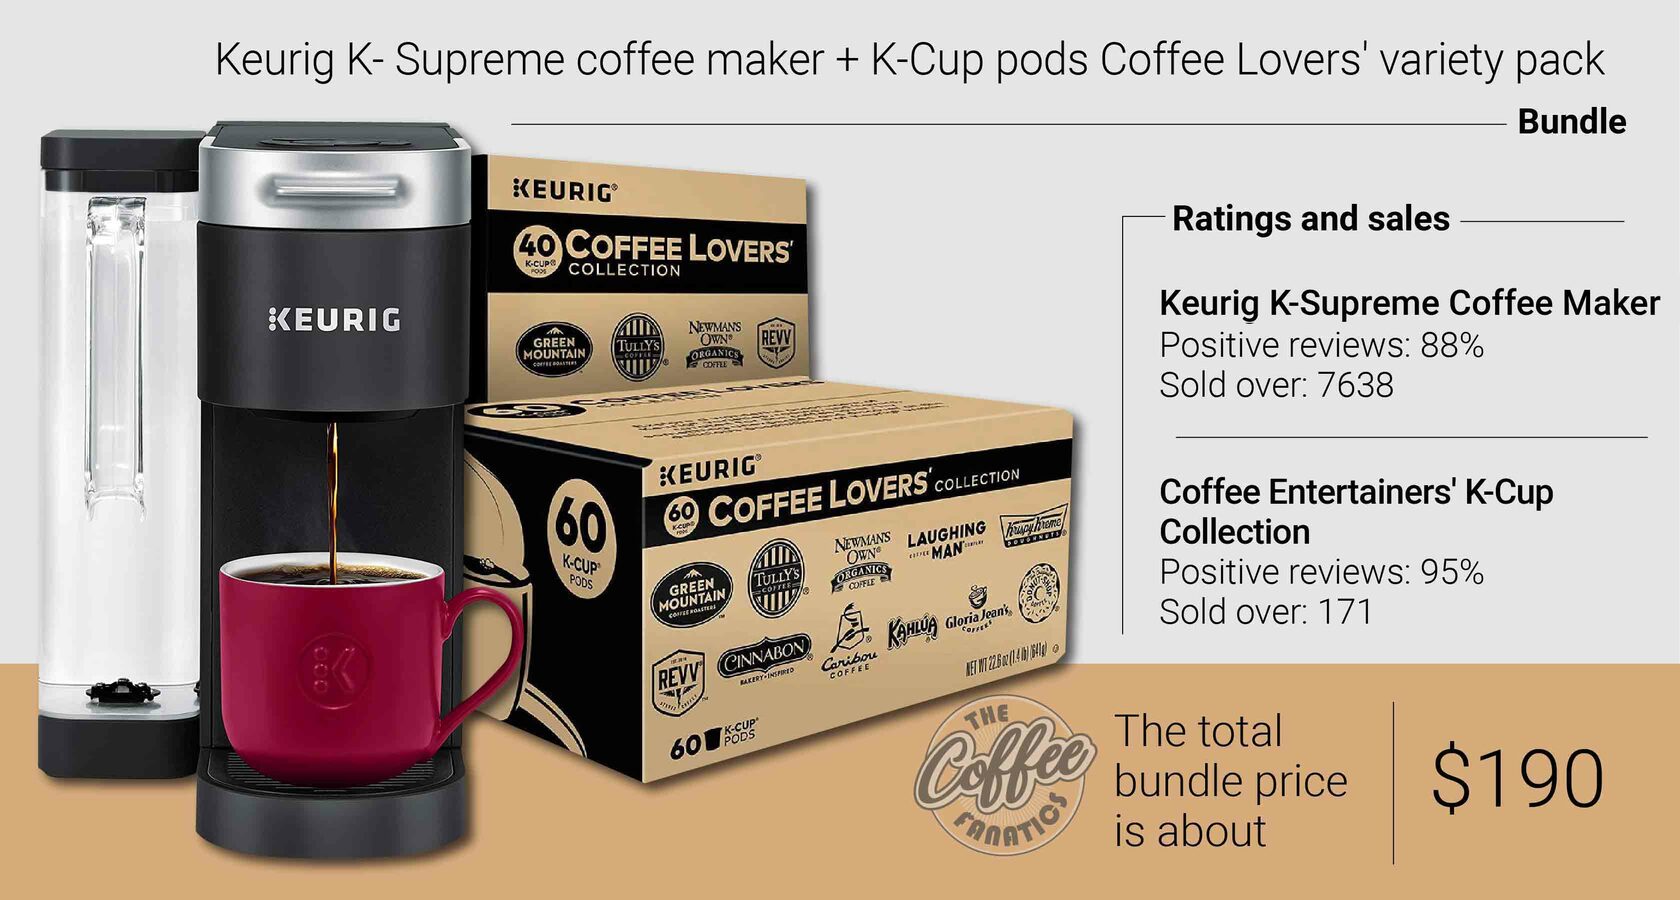 Keurig K-Classic Single Serve Coffee Maker with Keurig Entertainers'  Collection Variety Pack, 40 K-Cup Pods